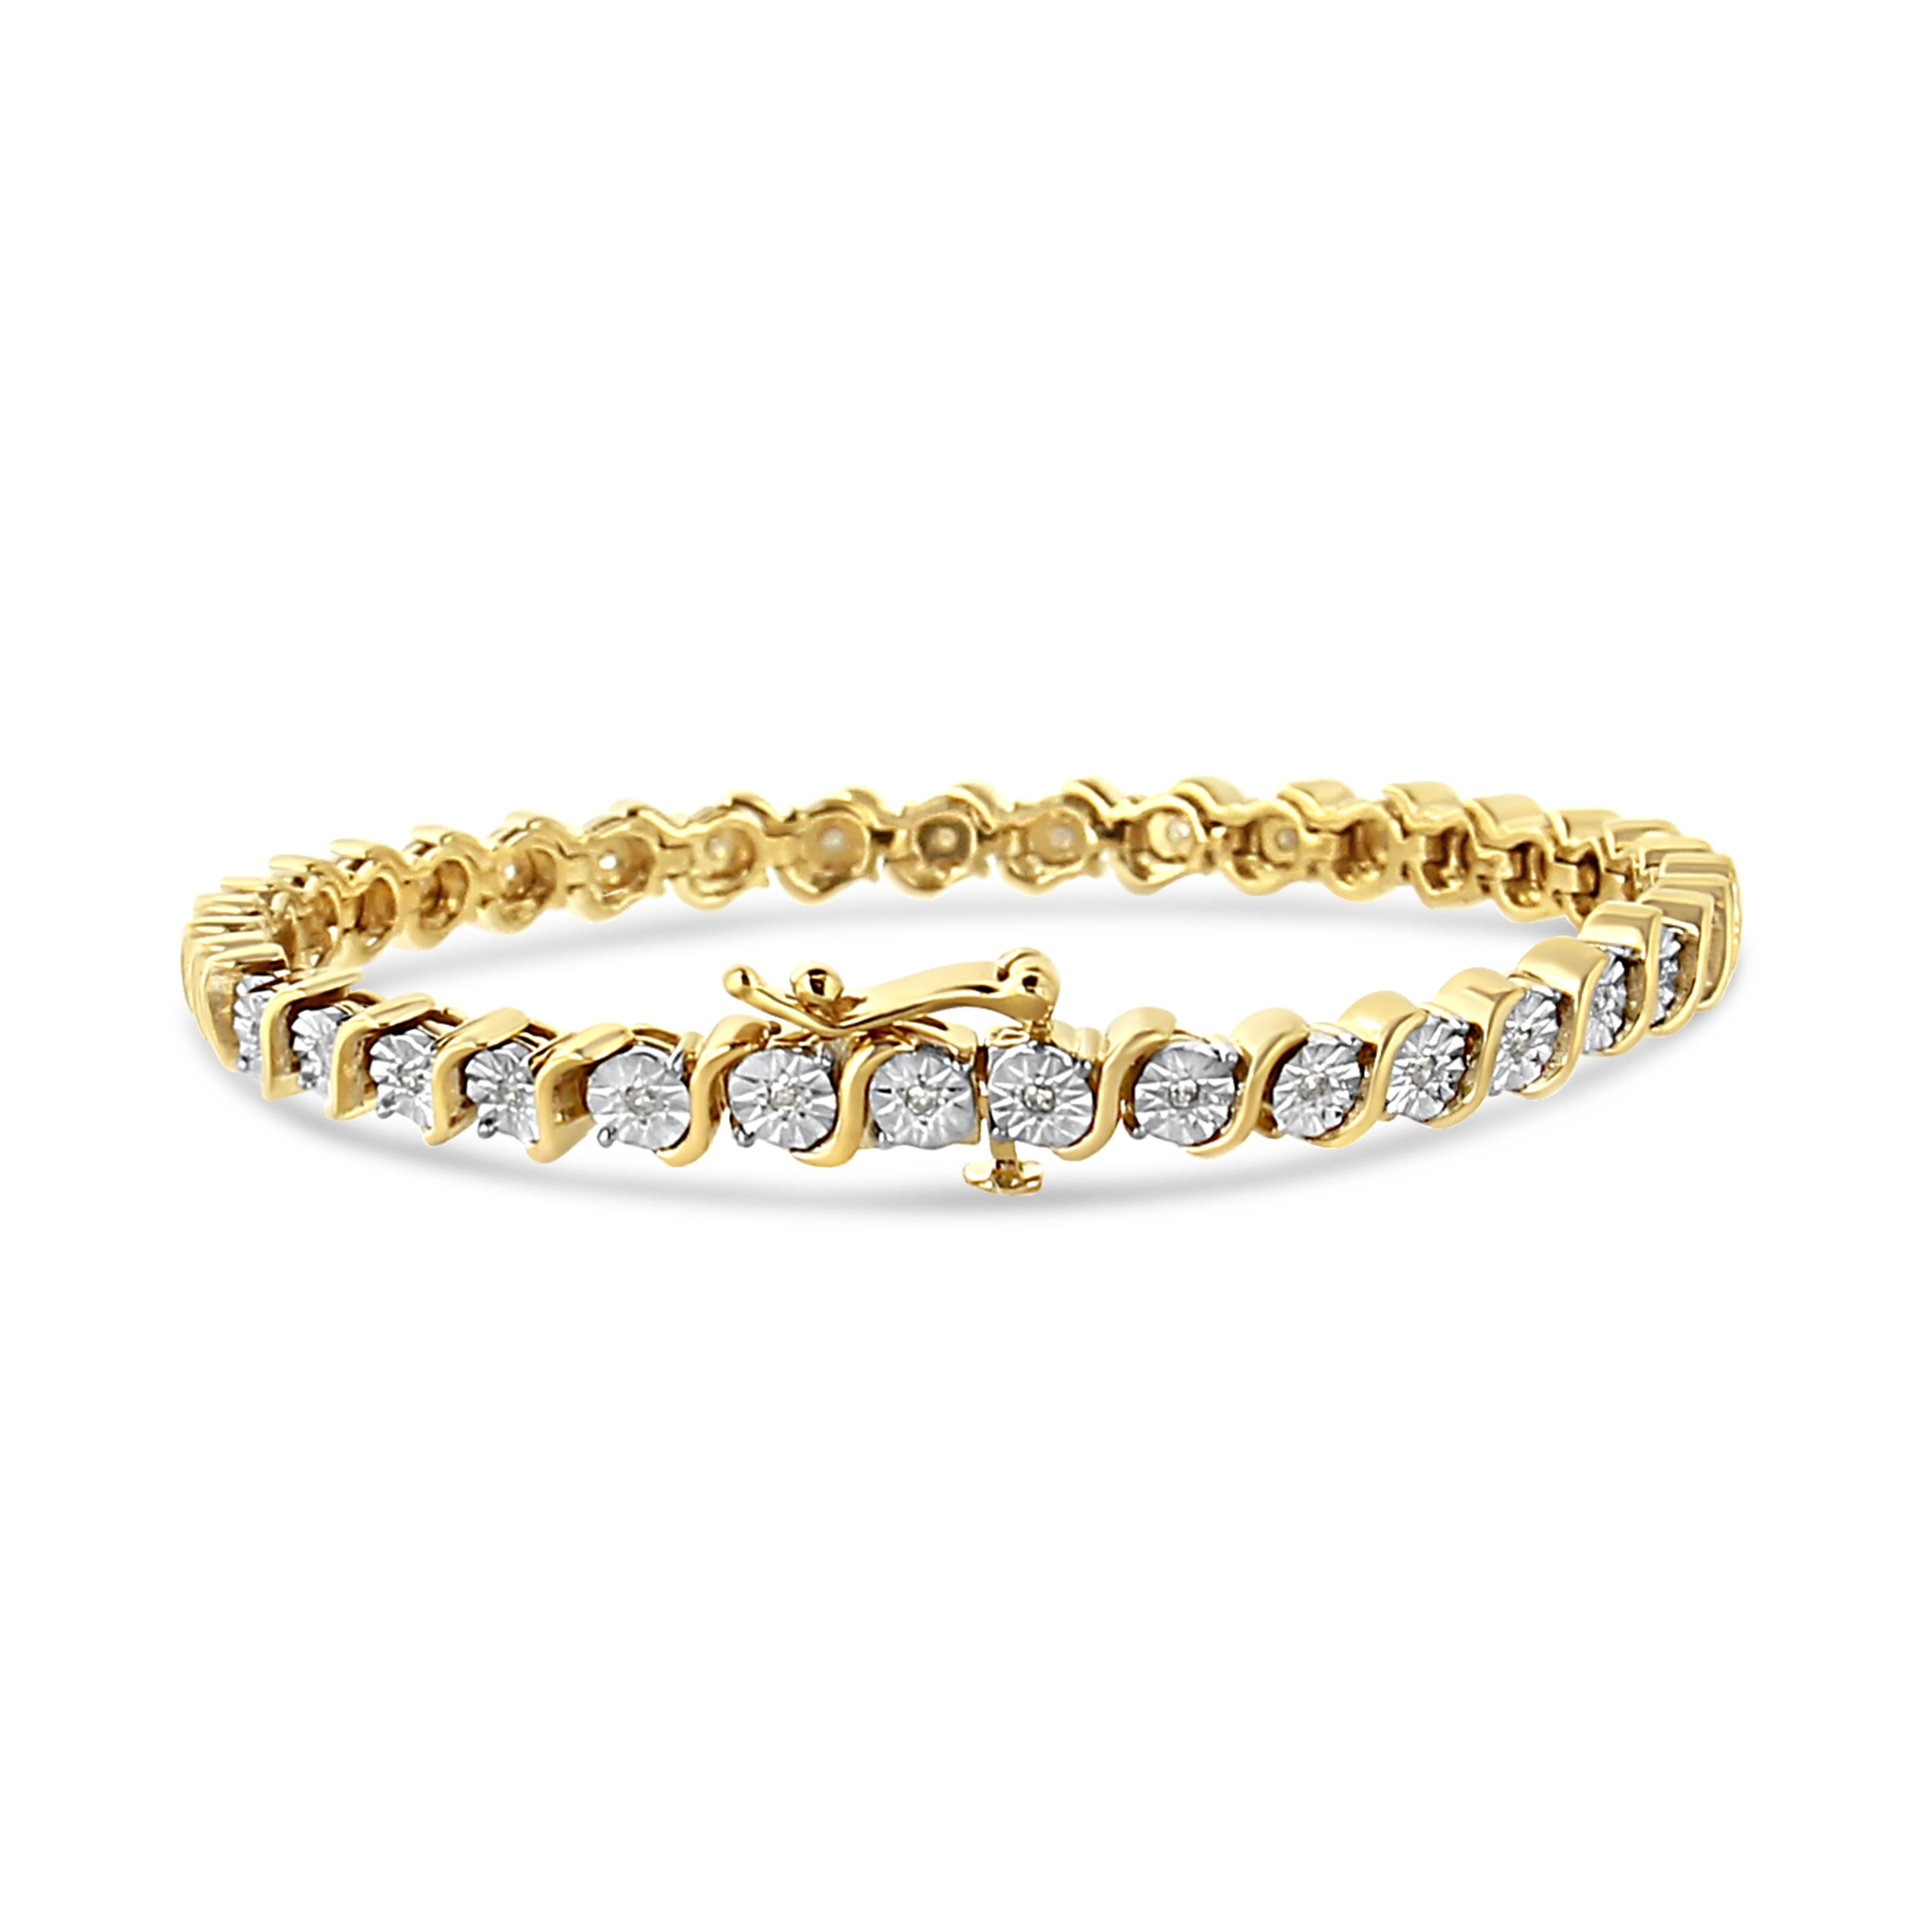 Adorn yourself with this gorgeous diamond tennis bracelet at any event for a touch of classic dazzle and elegance. Crafted in 14K Yellow Gold plated .925 Sterling Silver, this enticing design features shimmering, natural diamonds - masterfully set